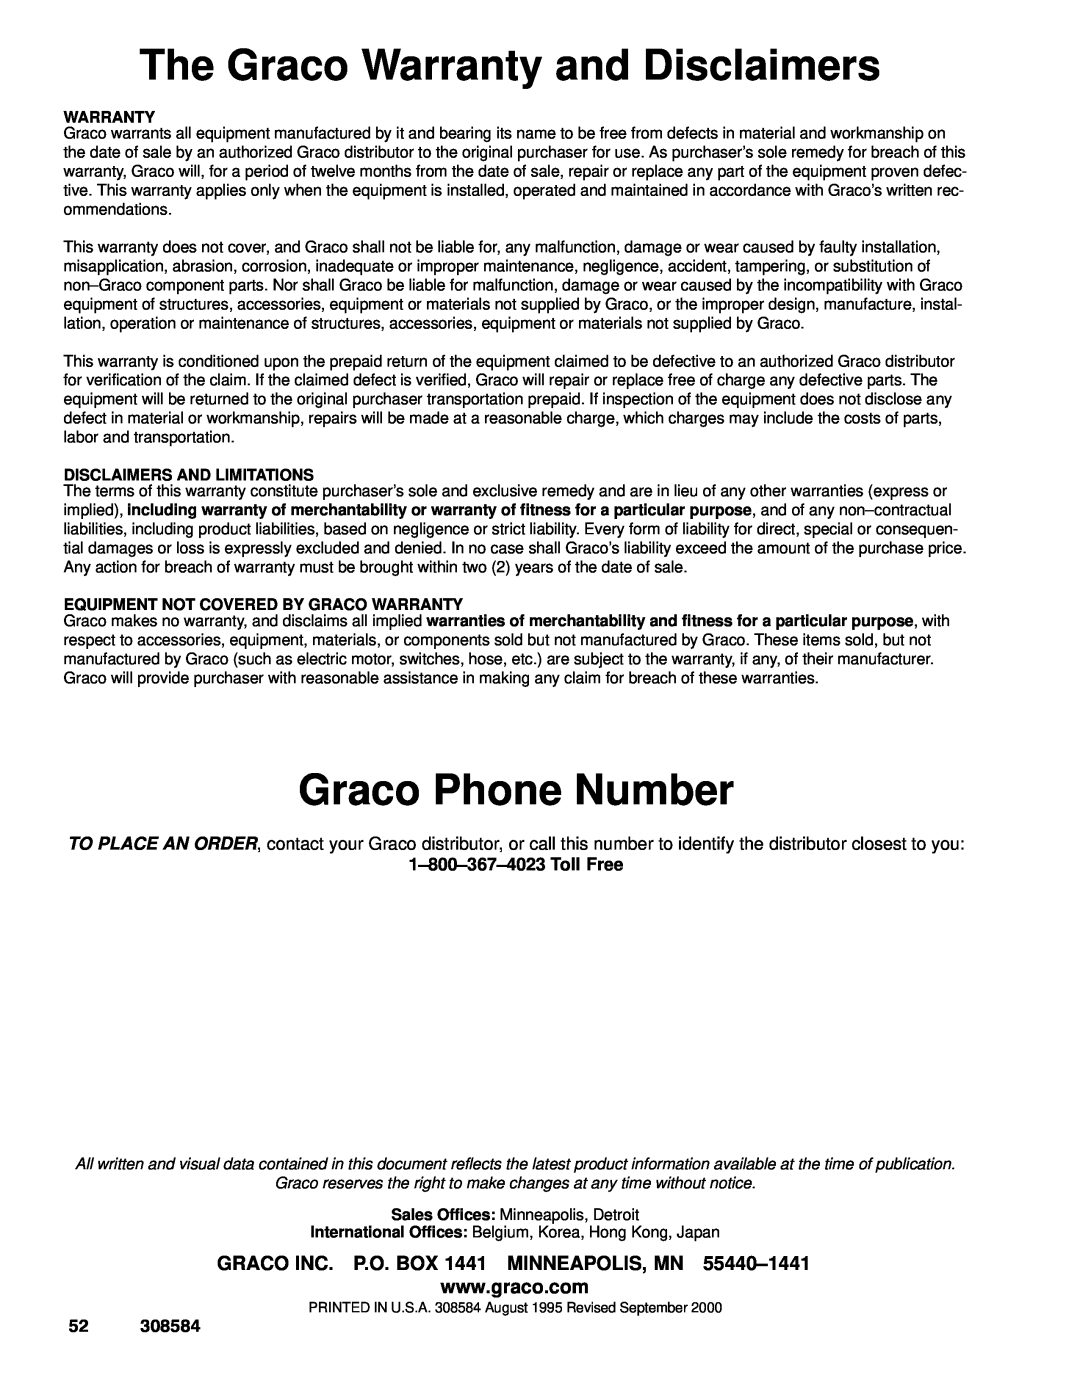 Graco Inc 308584, 3500WB The Graco Warranty and Disclaimers, Graco Phone Number, GRACO INC. P.O. BOX 1441 MINNEAPOLIS, MN 